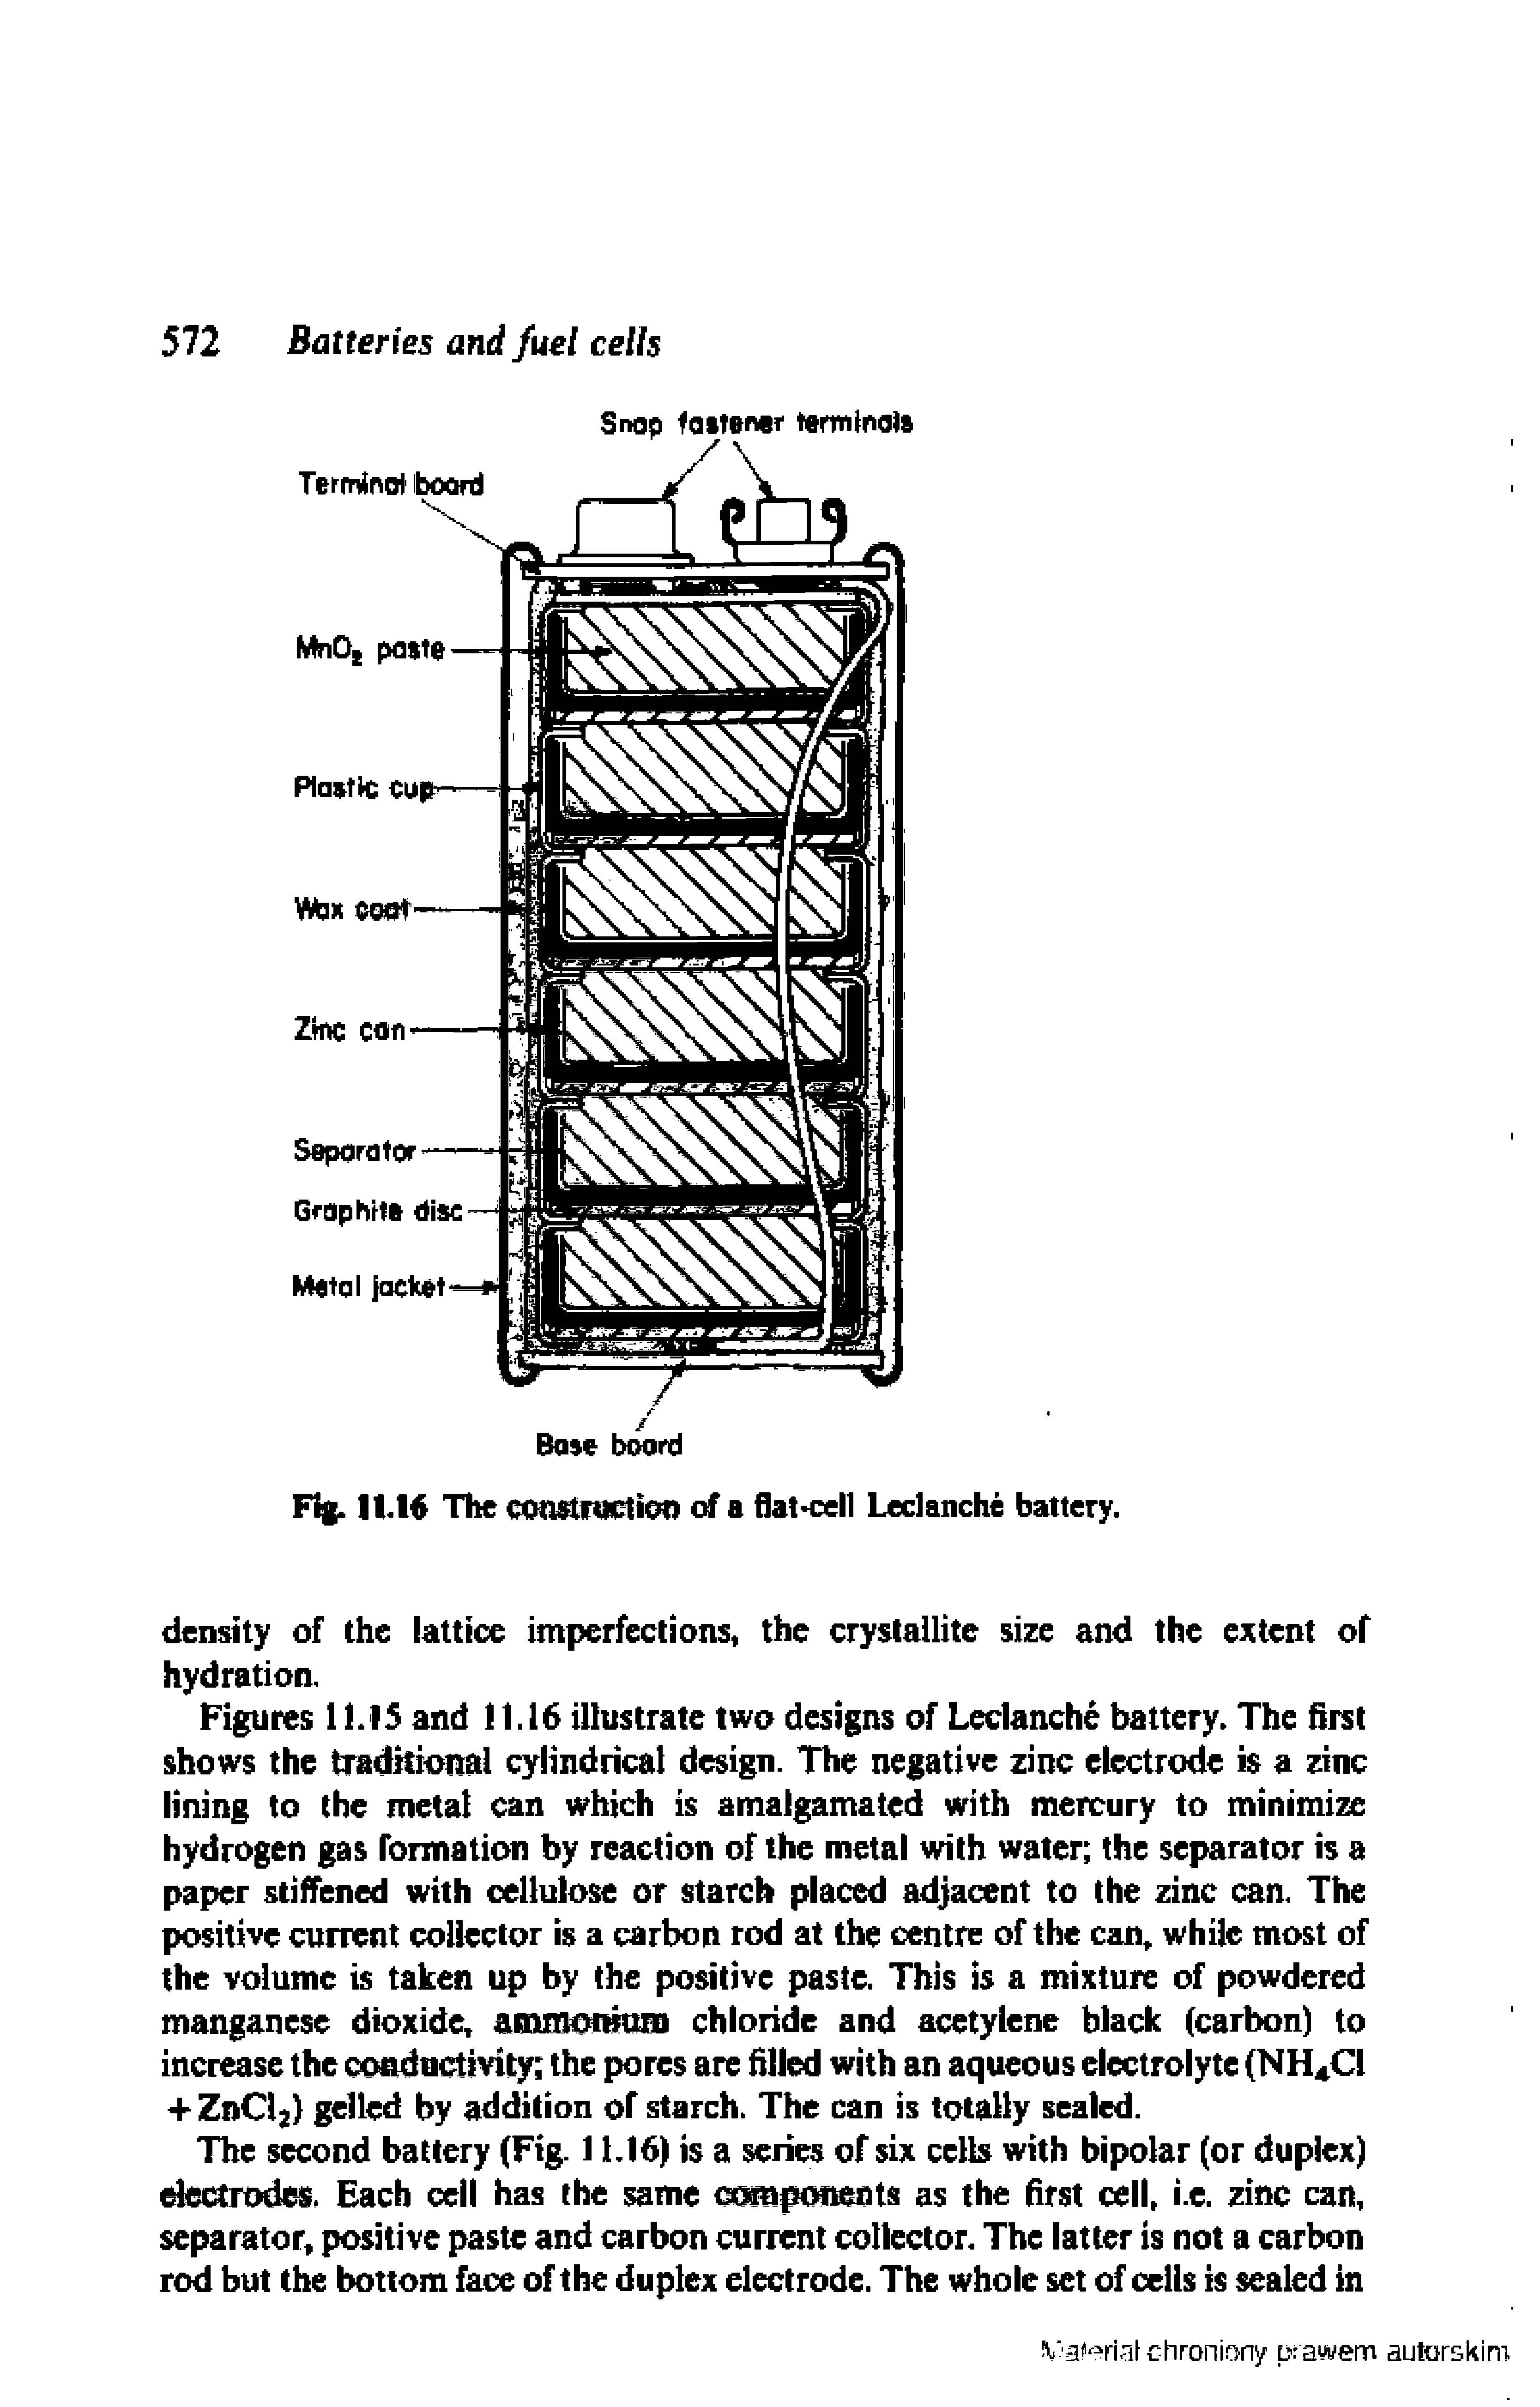 Figures 11J5 and 11.16 illustrate two designs of Leclanche battery. The first shows the traditional cylindrical design. The negative zinc electrode is a zinc lining to the metal can which is amalgamated with mercury to minimize hydrogen gas formation by reaction of the metal with water the separator is a paper stiffened with cellulose or starch placed adjacent to the zinc can. The positive current collector is a carbon rod at the centre of the can, while most of the volume is taken up by the positive paste. This is a mixture of powdered manganese dioxide ainmotmtm chloride and acetylene black (carbon) to increase the conductivity the pores are filled with an aqueous electrolyte (NH Cl + ZnCl ) gelled by addition of starch. The can is totally scaled.